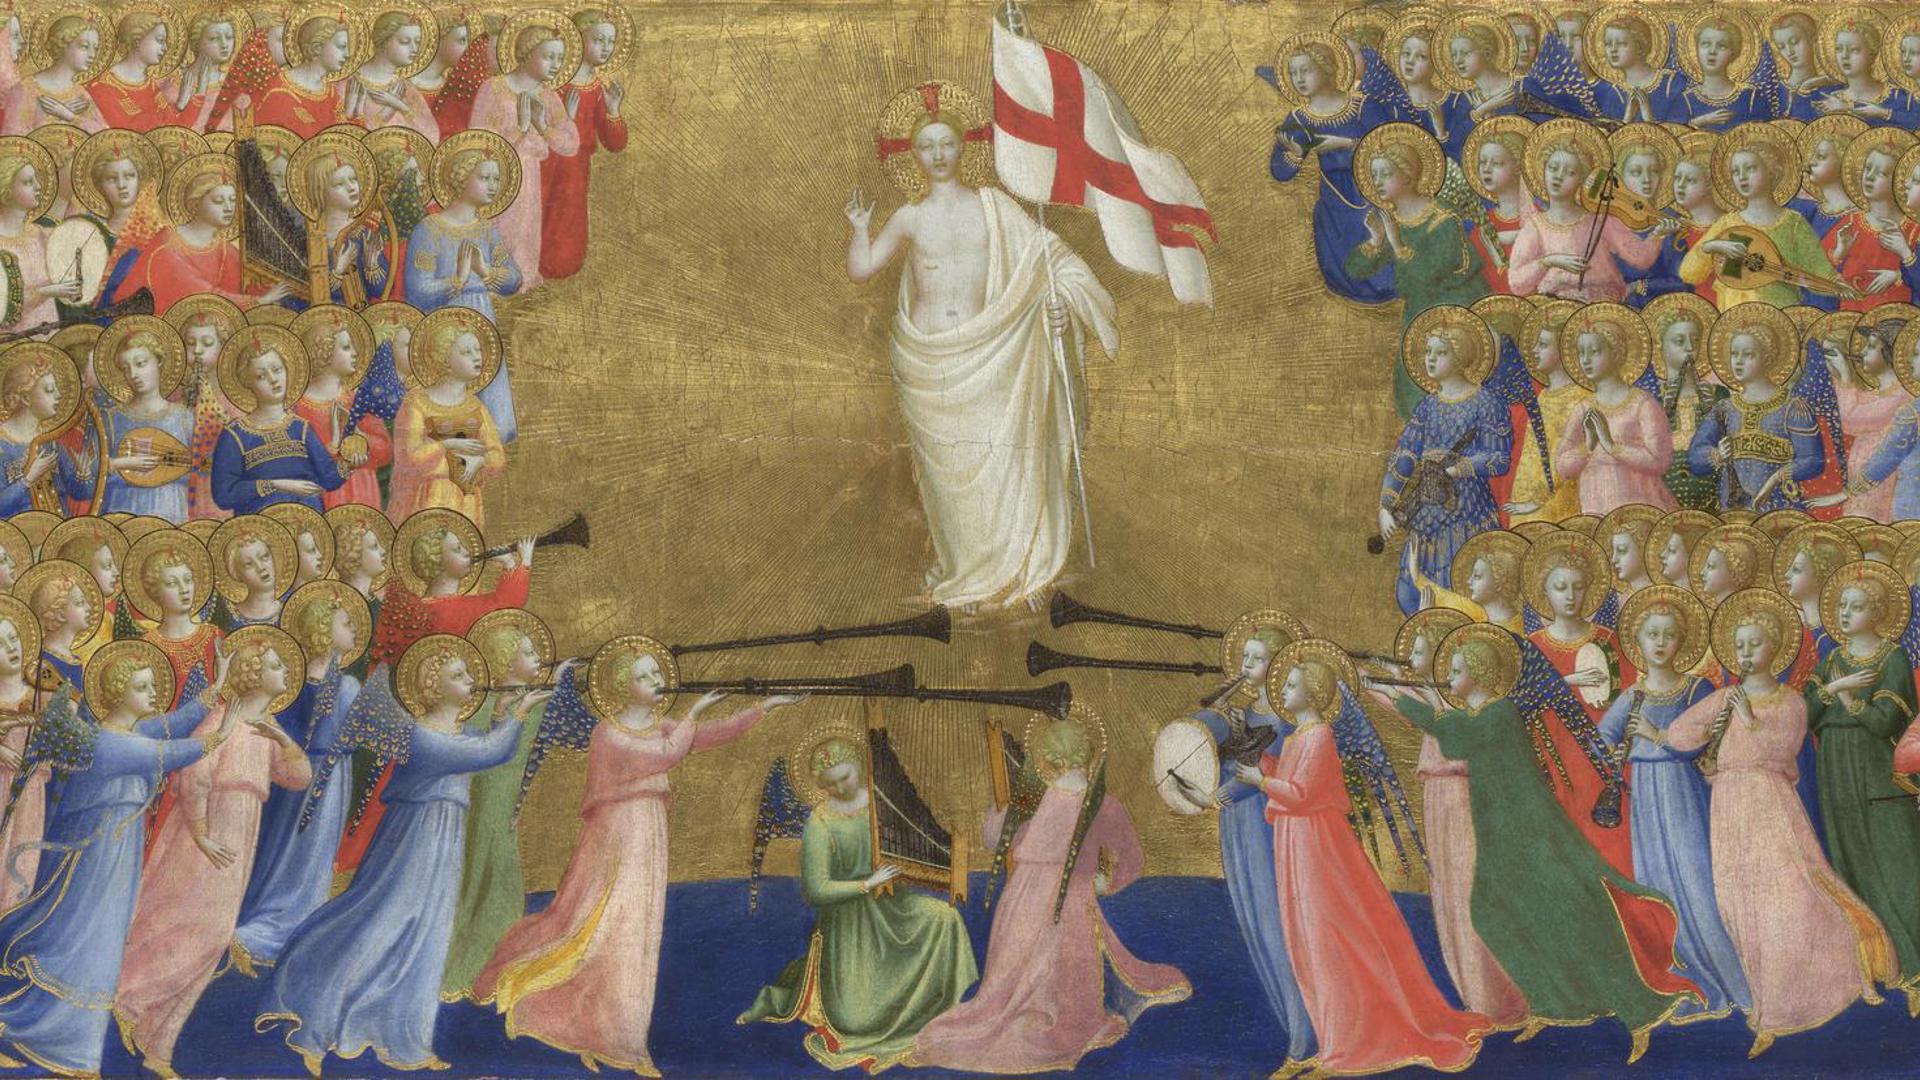 Christ Glorified in the Court of Heaven by Probably by Fra Angelico